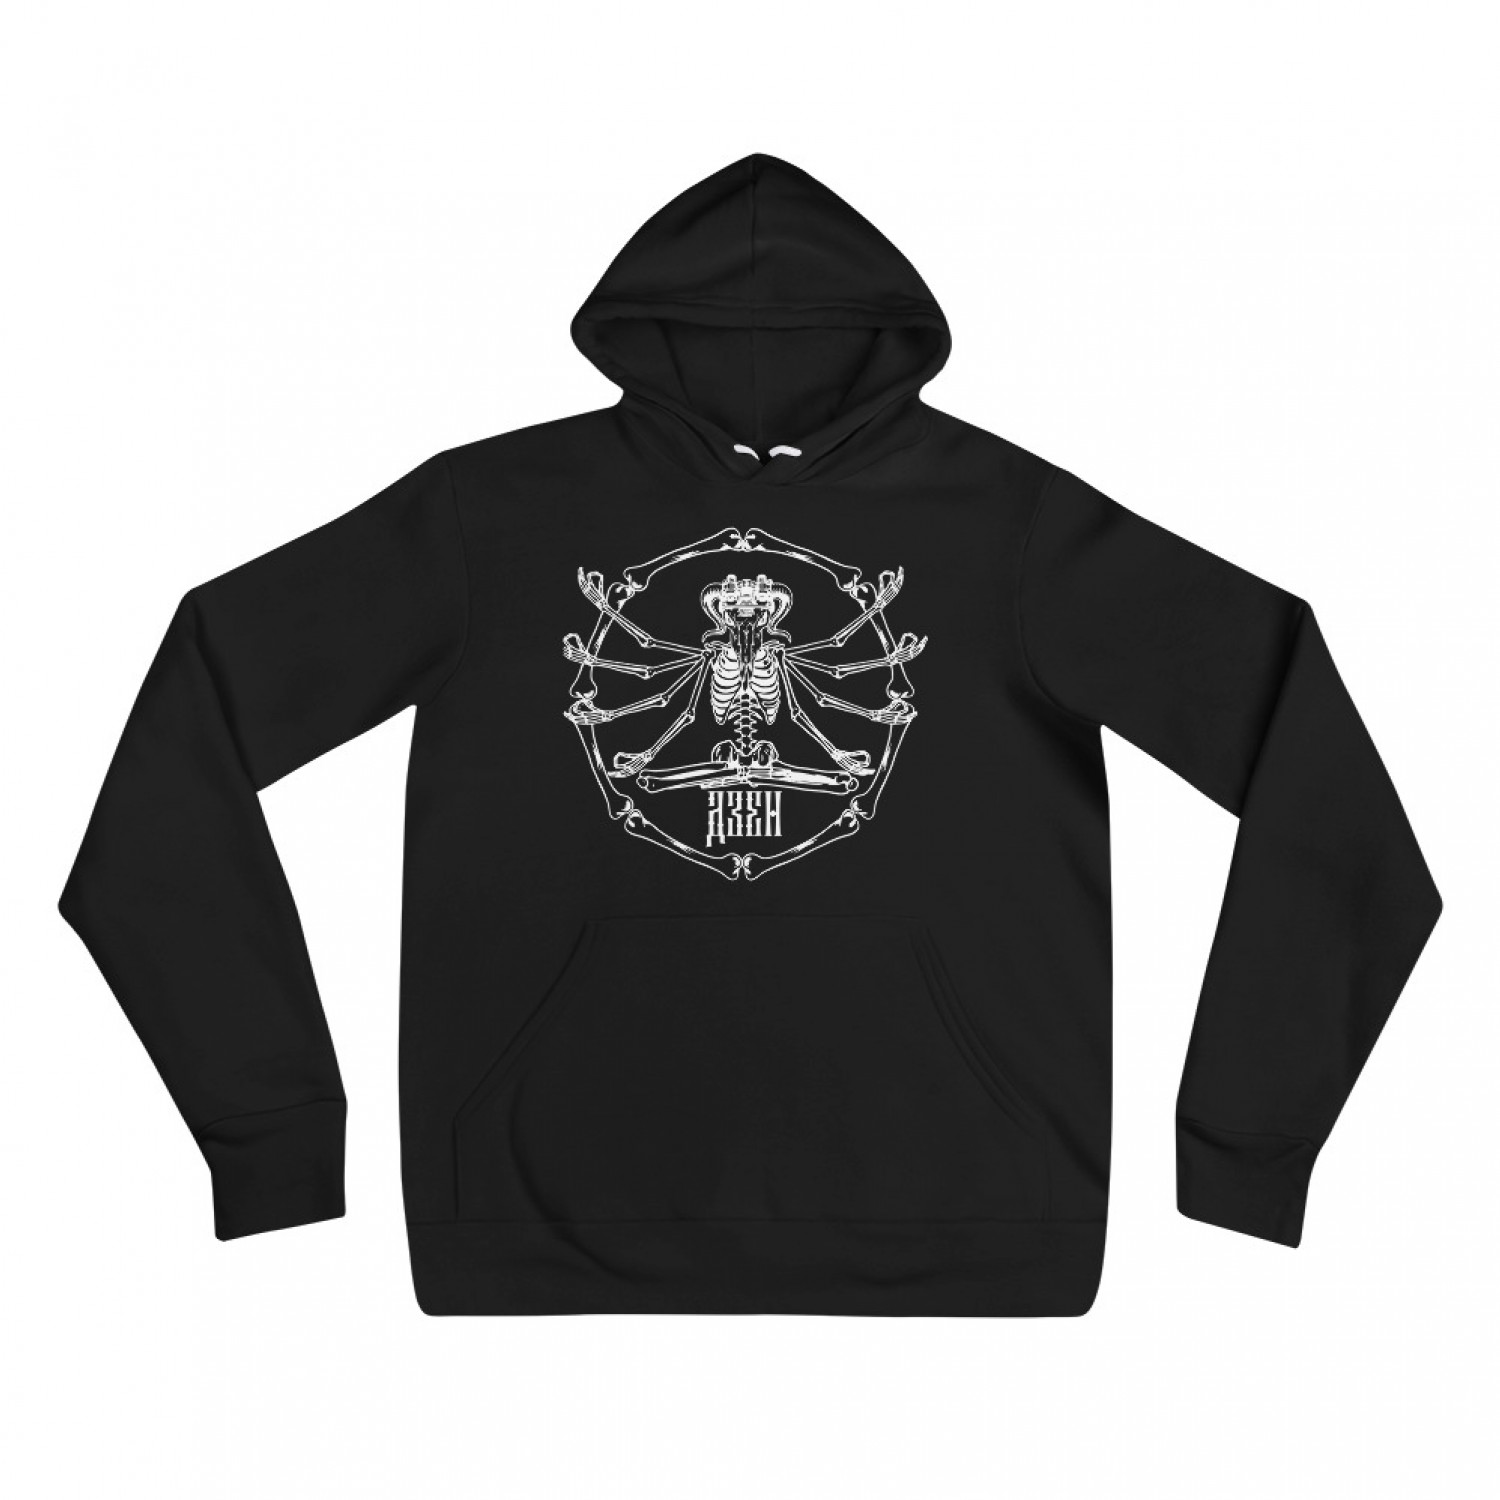 Hoodie with a military print Anti Terror